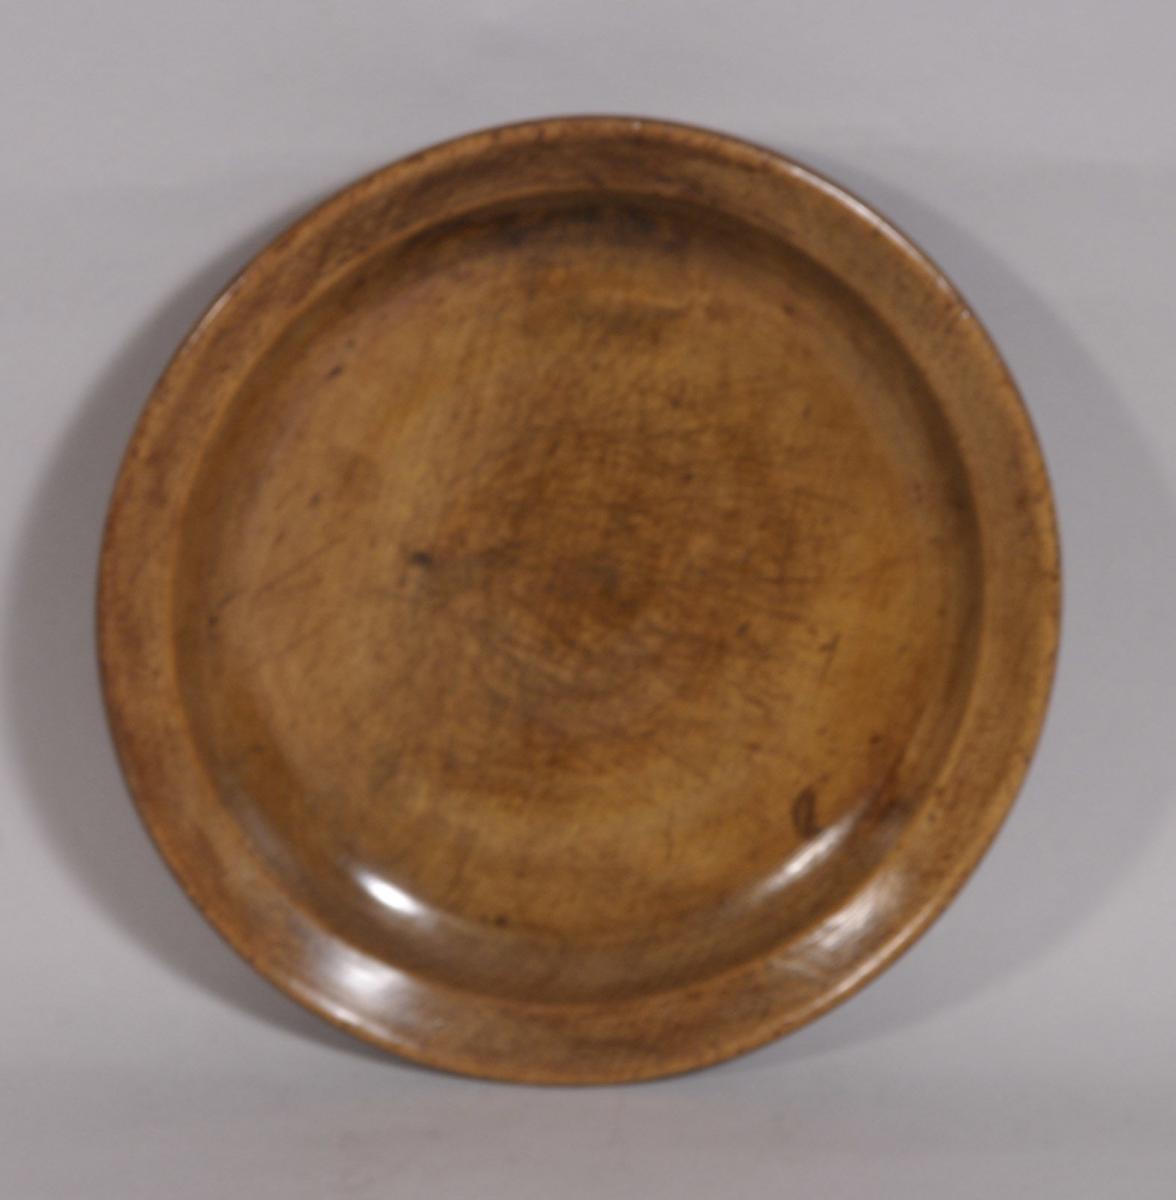 S/3452 Antique Treen 18th Century Sycamore Platter